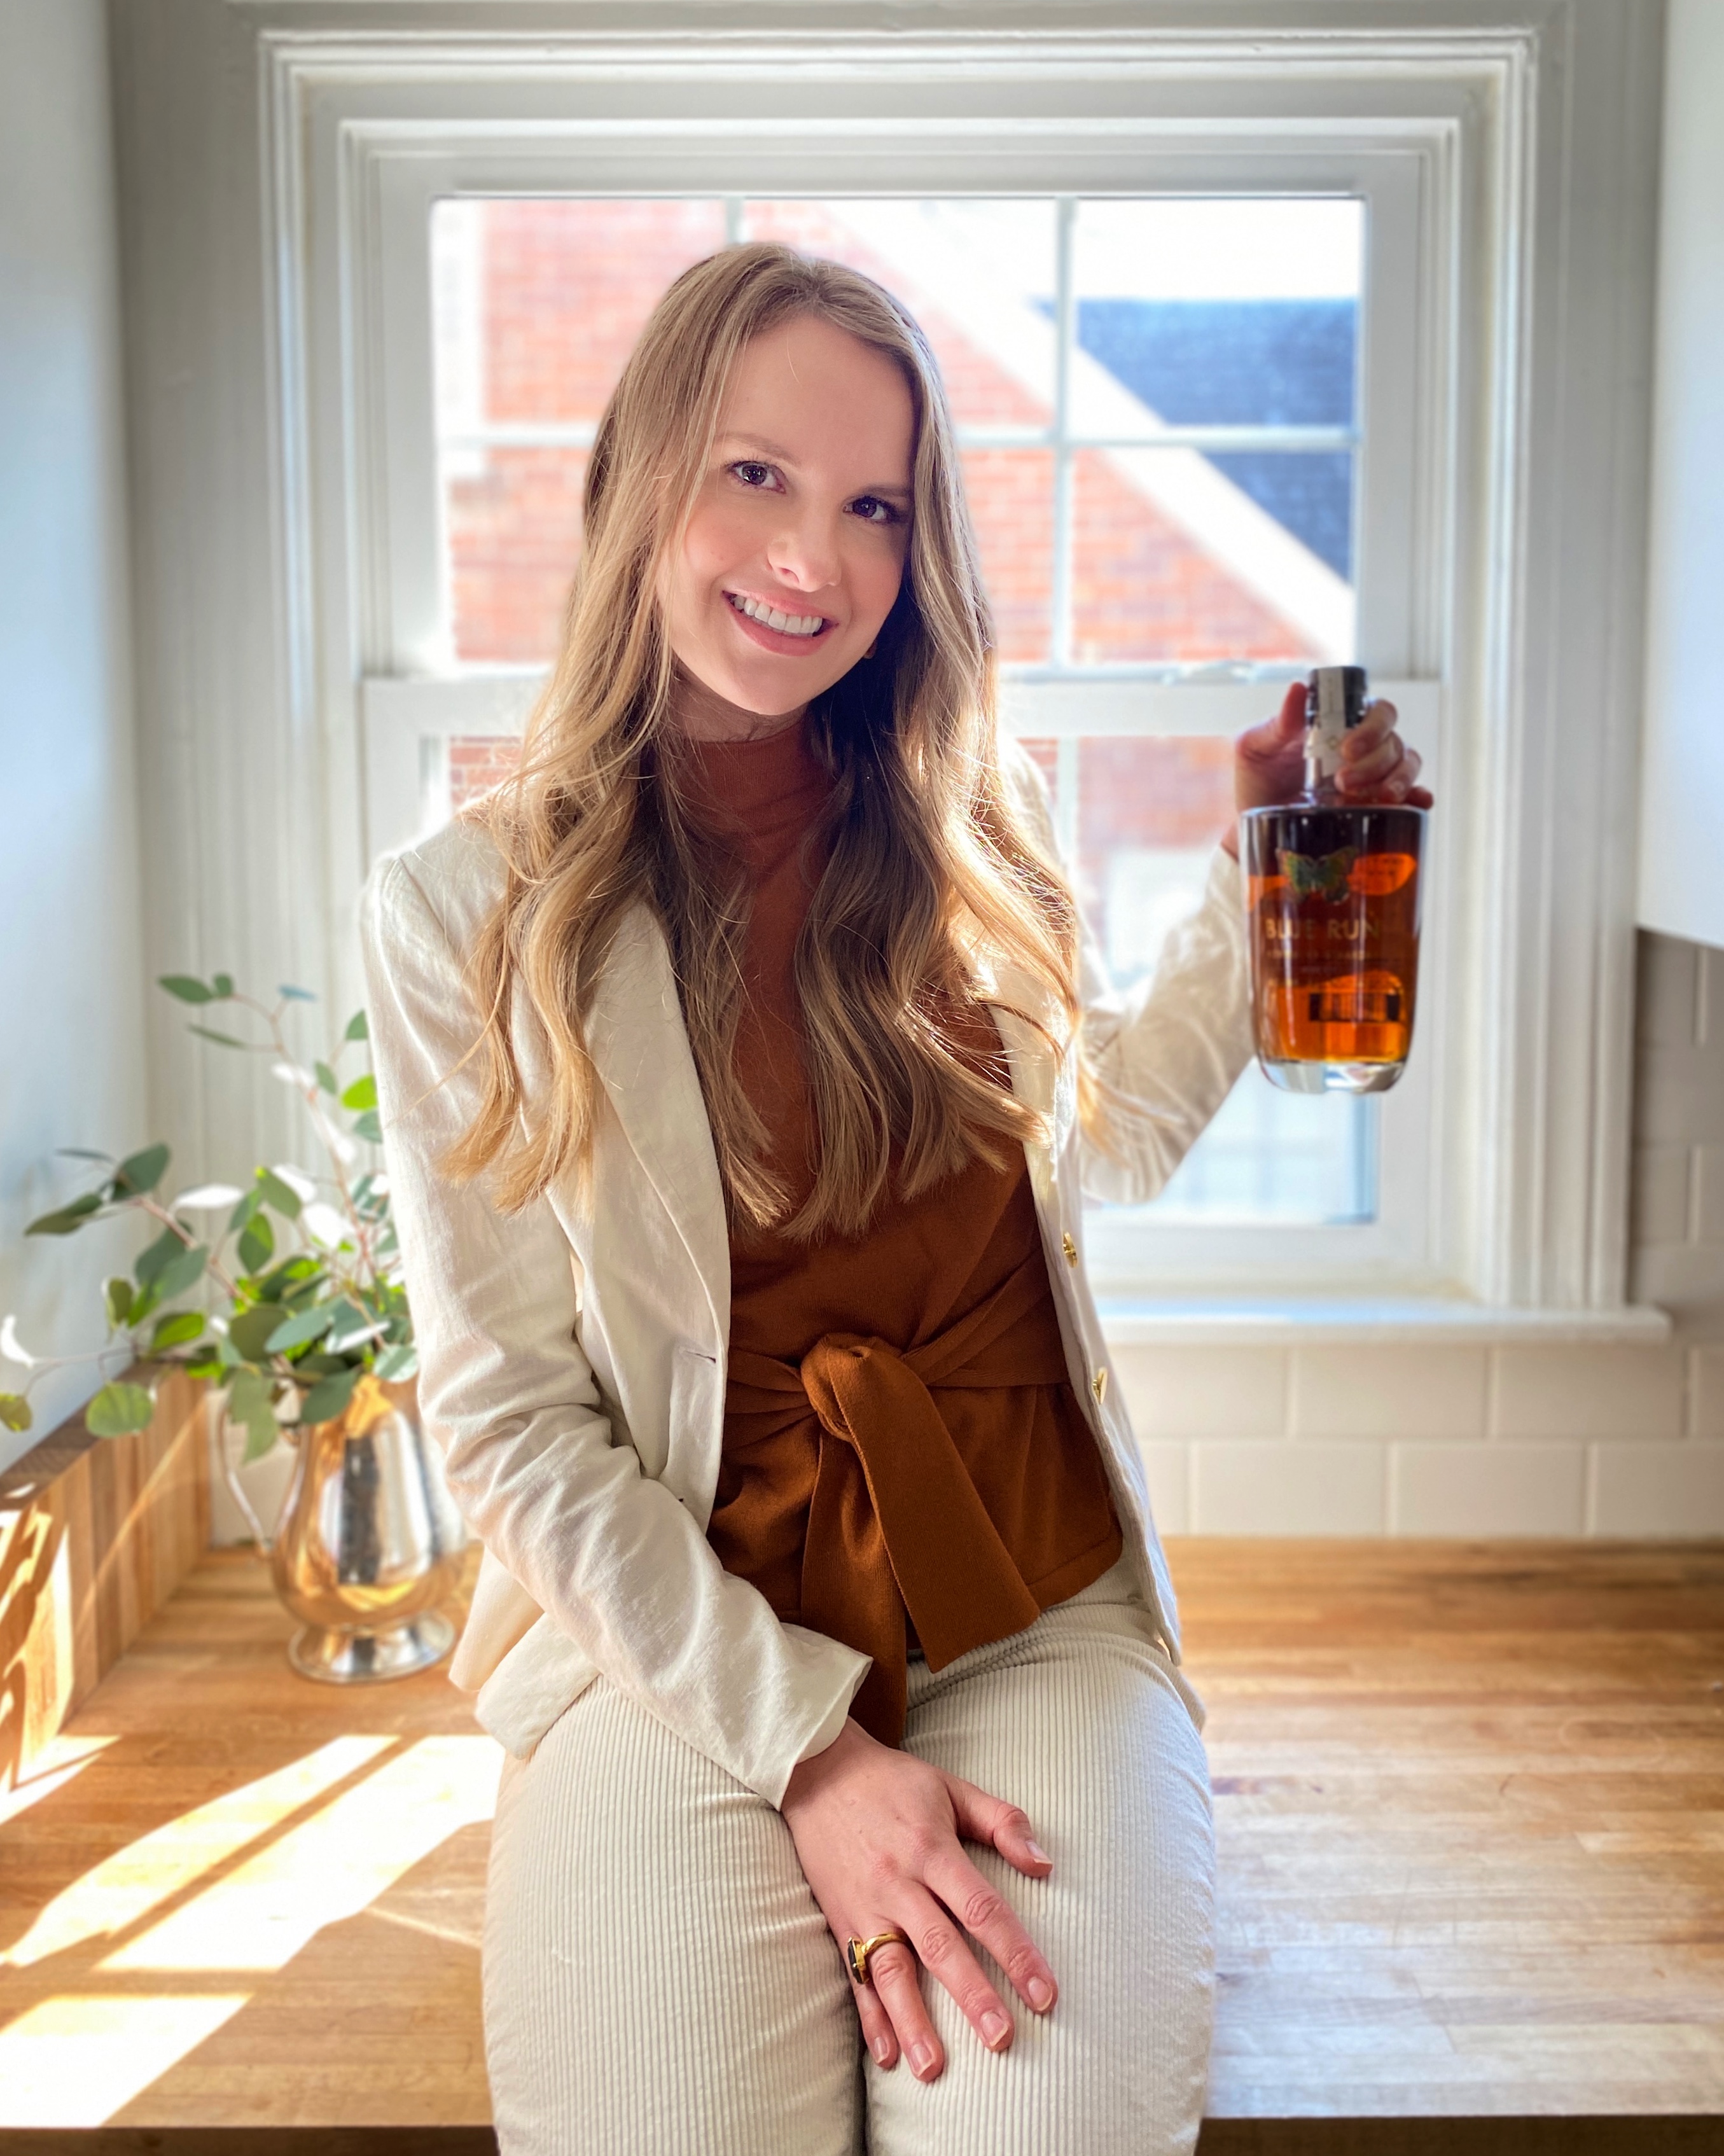 A Year In Review With Blue Run Spirits’ Shaylyn Gammon